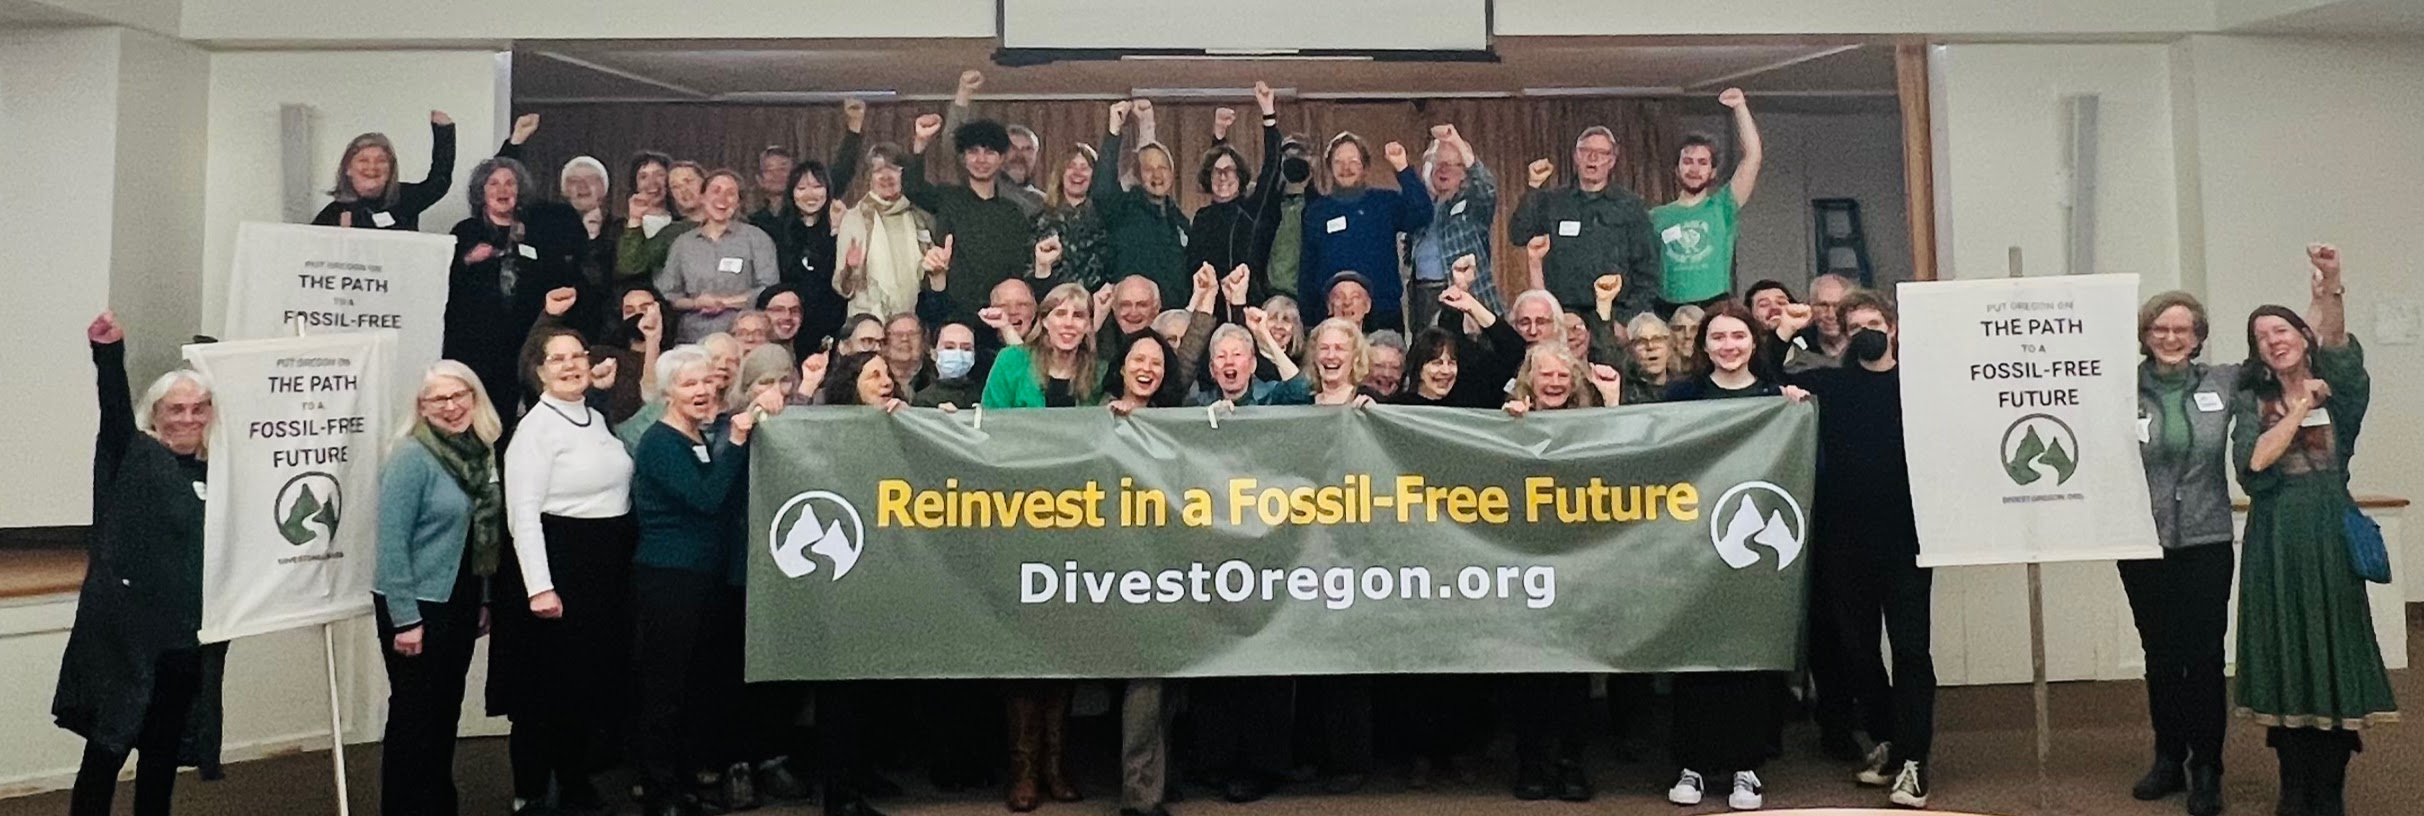 Members of the nonprofit environmental coalition Divest Oregon visited the state Capitol in Salem Wednesday to promote legislation that would divest the state's public employee retirement fund from coal investments. (Photo courtesy of Divest Oregon)